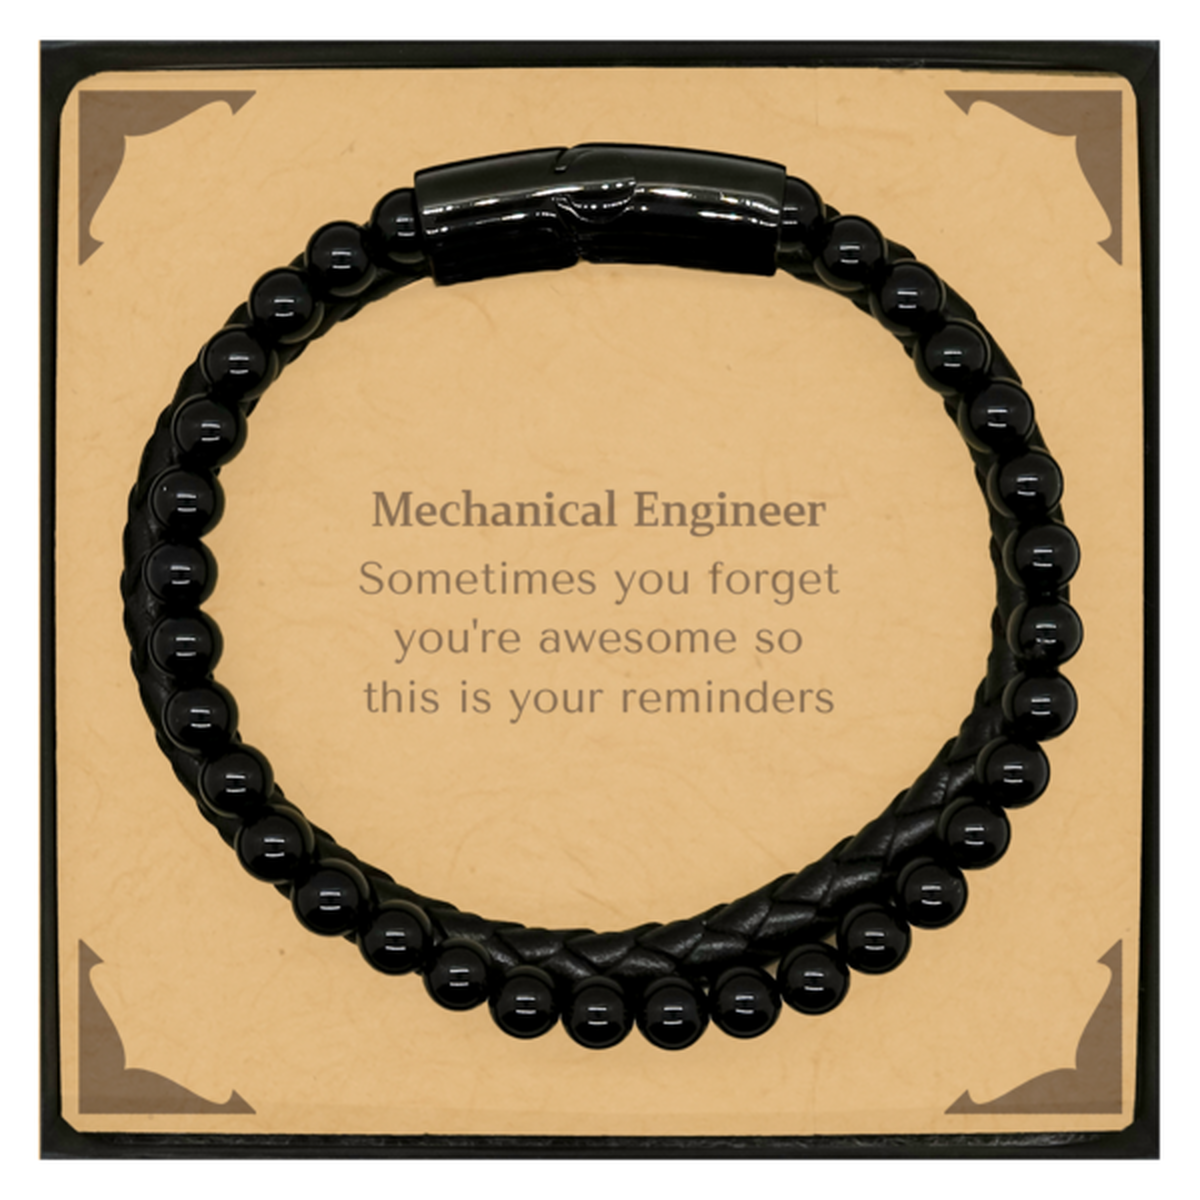 Sentimental Mechanical Engineer Stone Leather Bracelets, Mechanical Engineer Sometimes you forget you're awesome so this is your reminders, Graduation Christmas Birthday Gifts for Mechanical Engineer, Men, Women, Coworkers